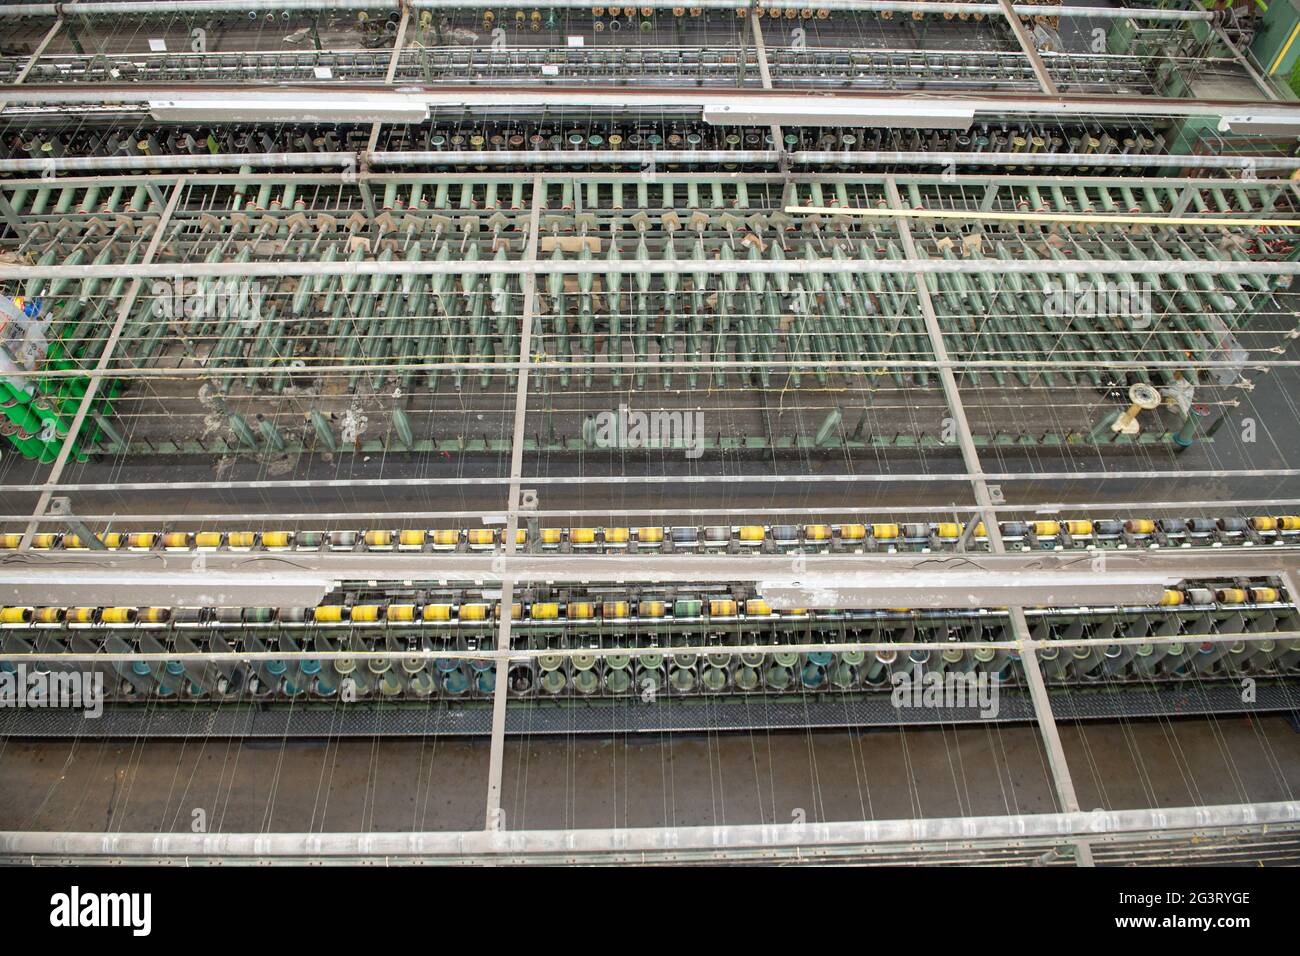 Production of nylon thread in a factory Stock Photo